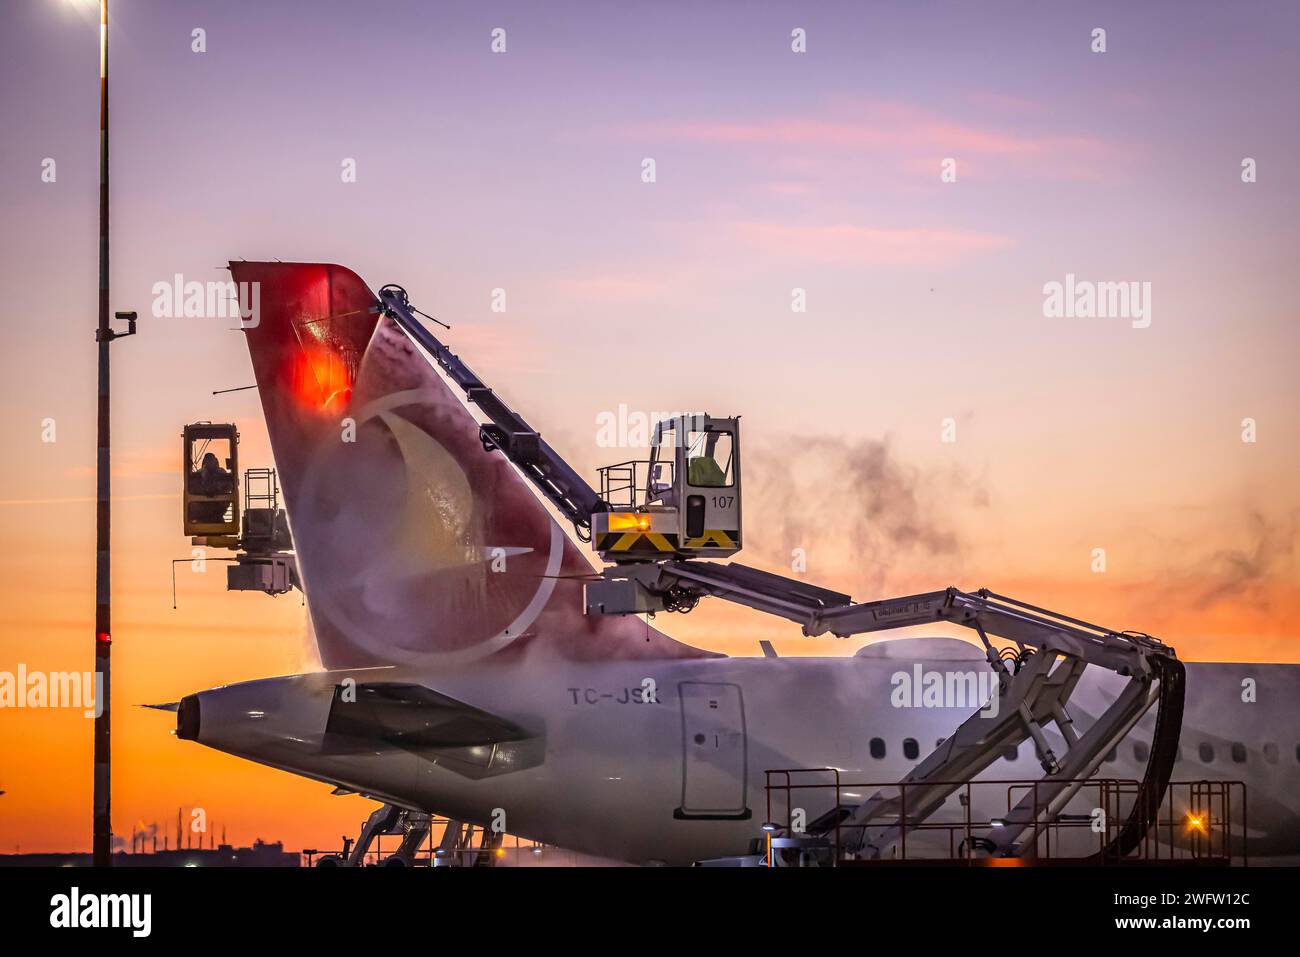 Frost at the airport, a Turkish Airlines aircraft is de-iced in front of sunrise. Airbus A321-231, Fraport, Frankfurt am Main, Hesse, Germany Stock Photo